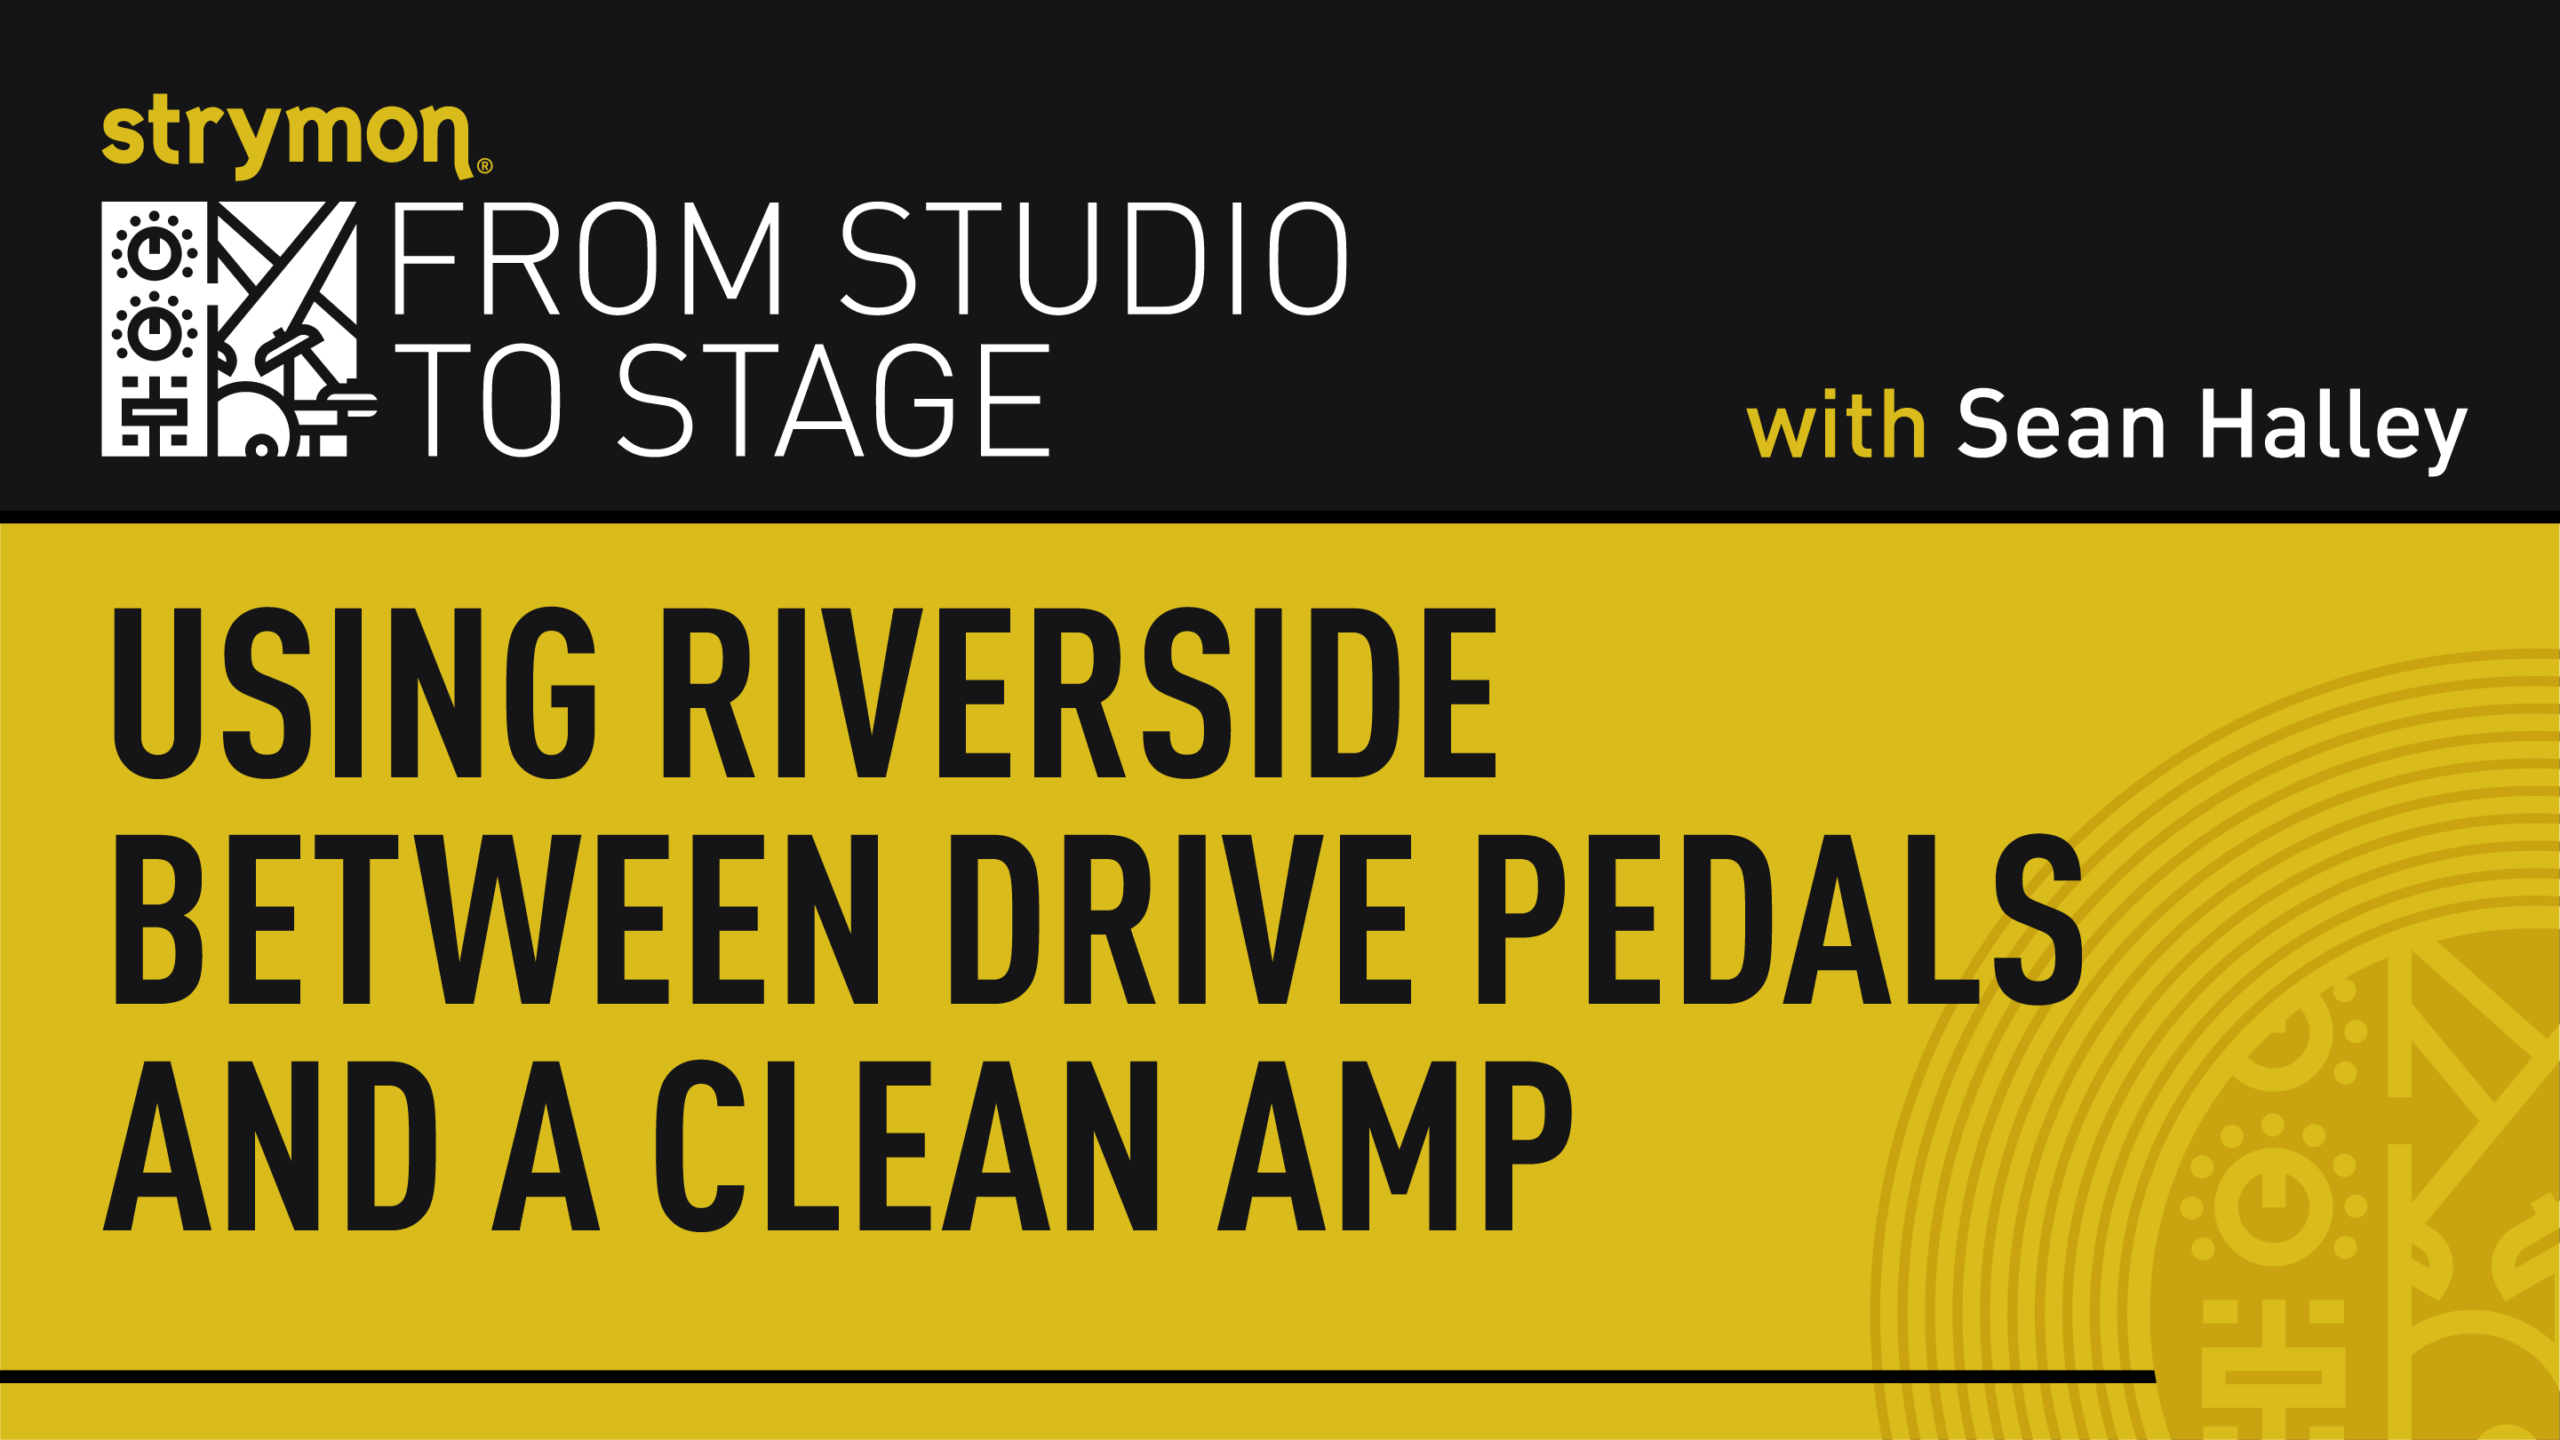 Strymon from studio to stage with Sean Halley. Using Riverside between drive pedals and a clean amp.